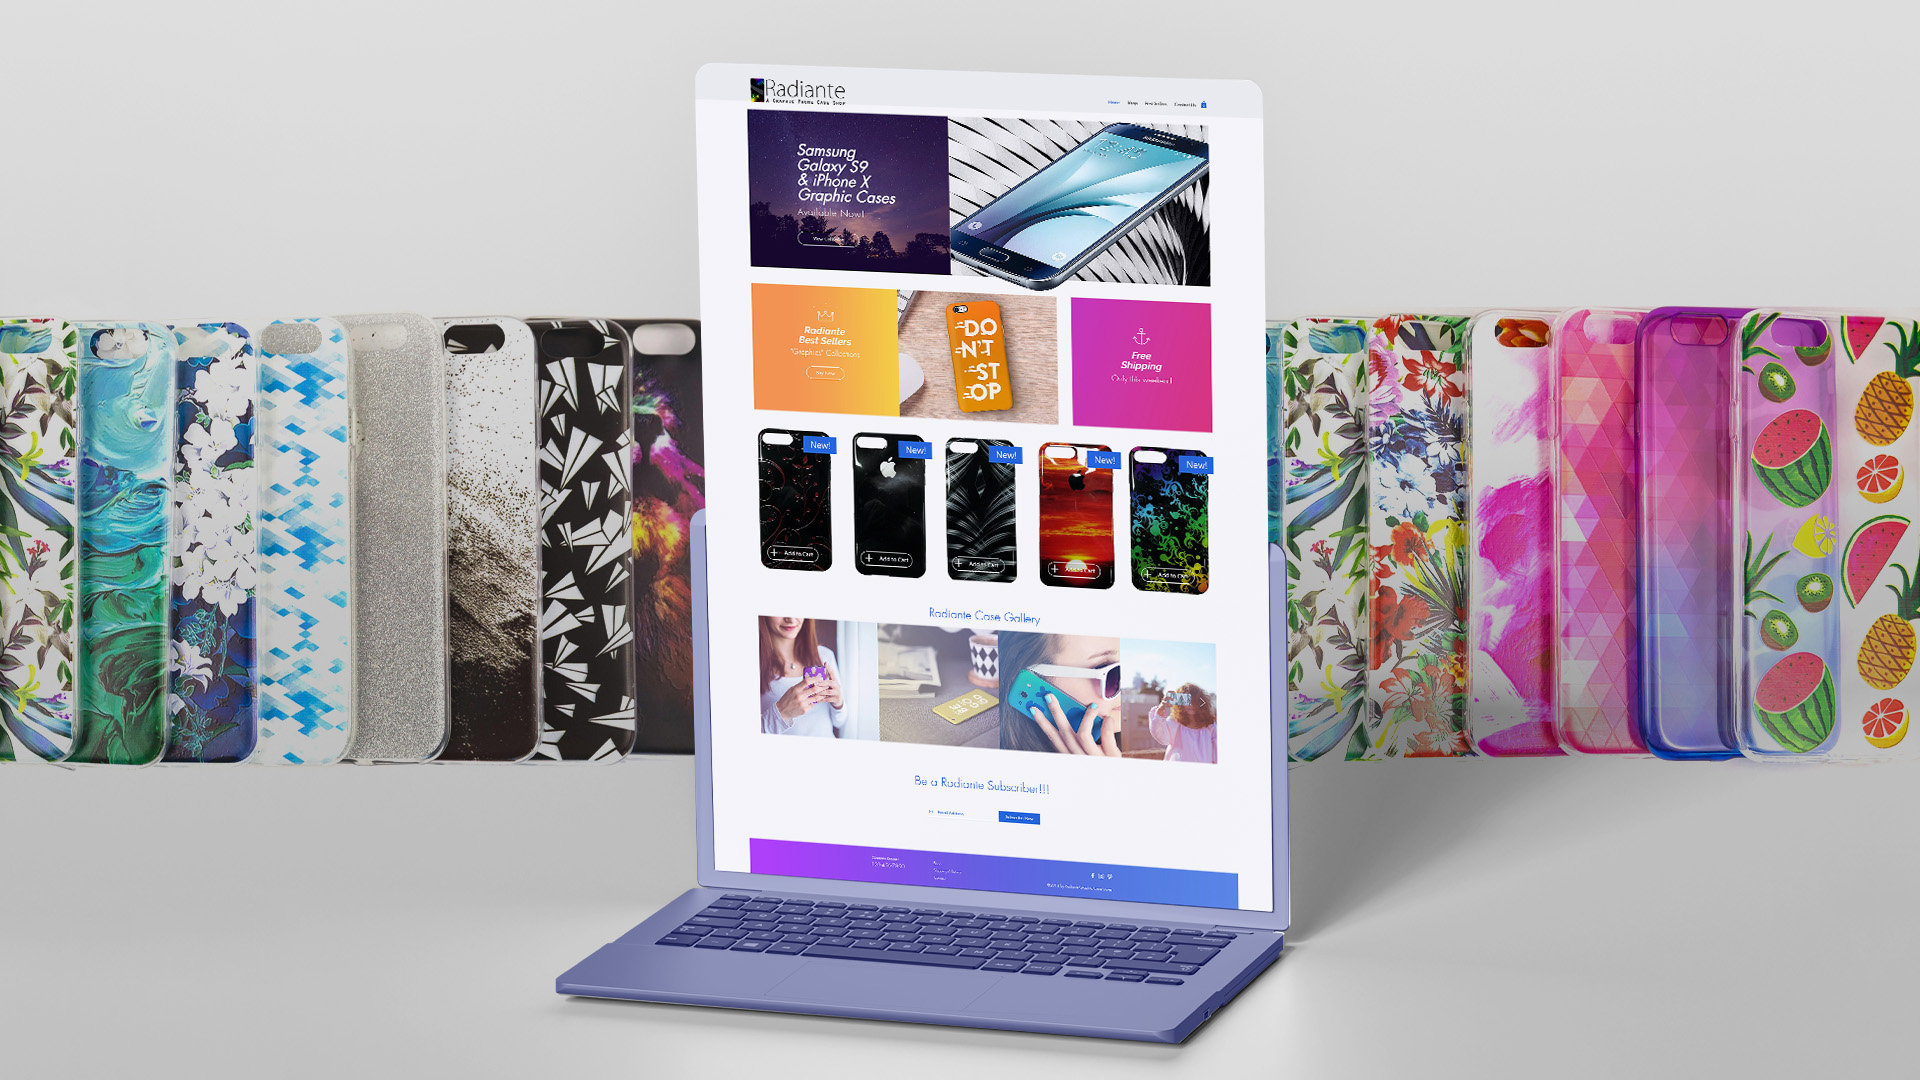 Radiante website on a laptop with a background of dozens of phone cases.